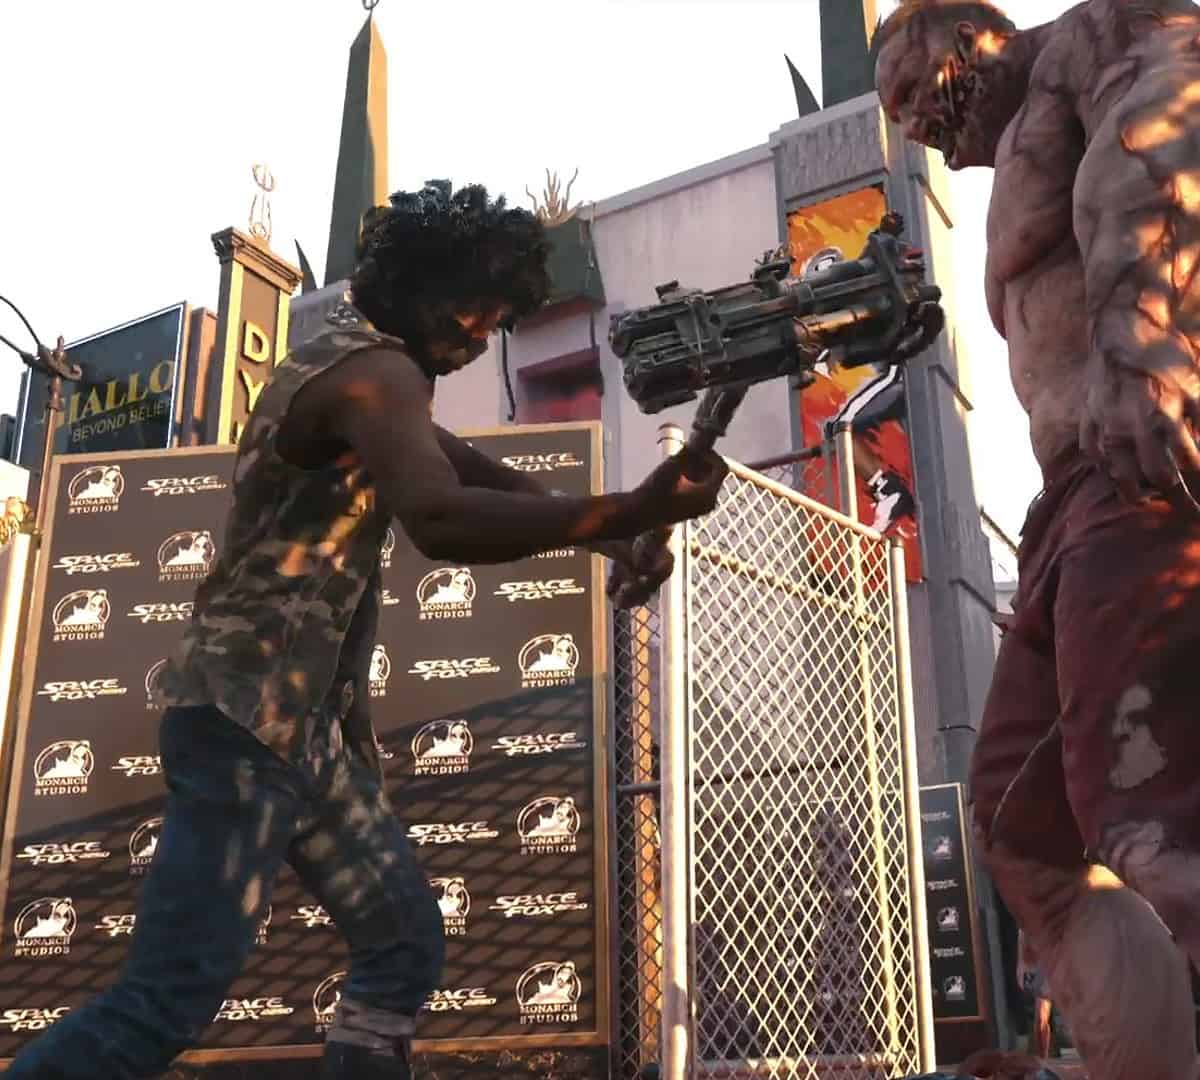 Dead Island 2 legendary weapons: Jacob swinging Emma's Wrath, the legendary hammer you get for completing the story.